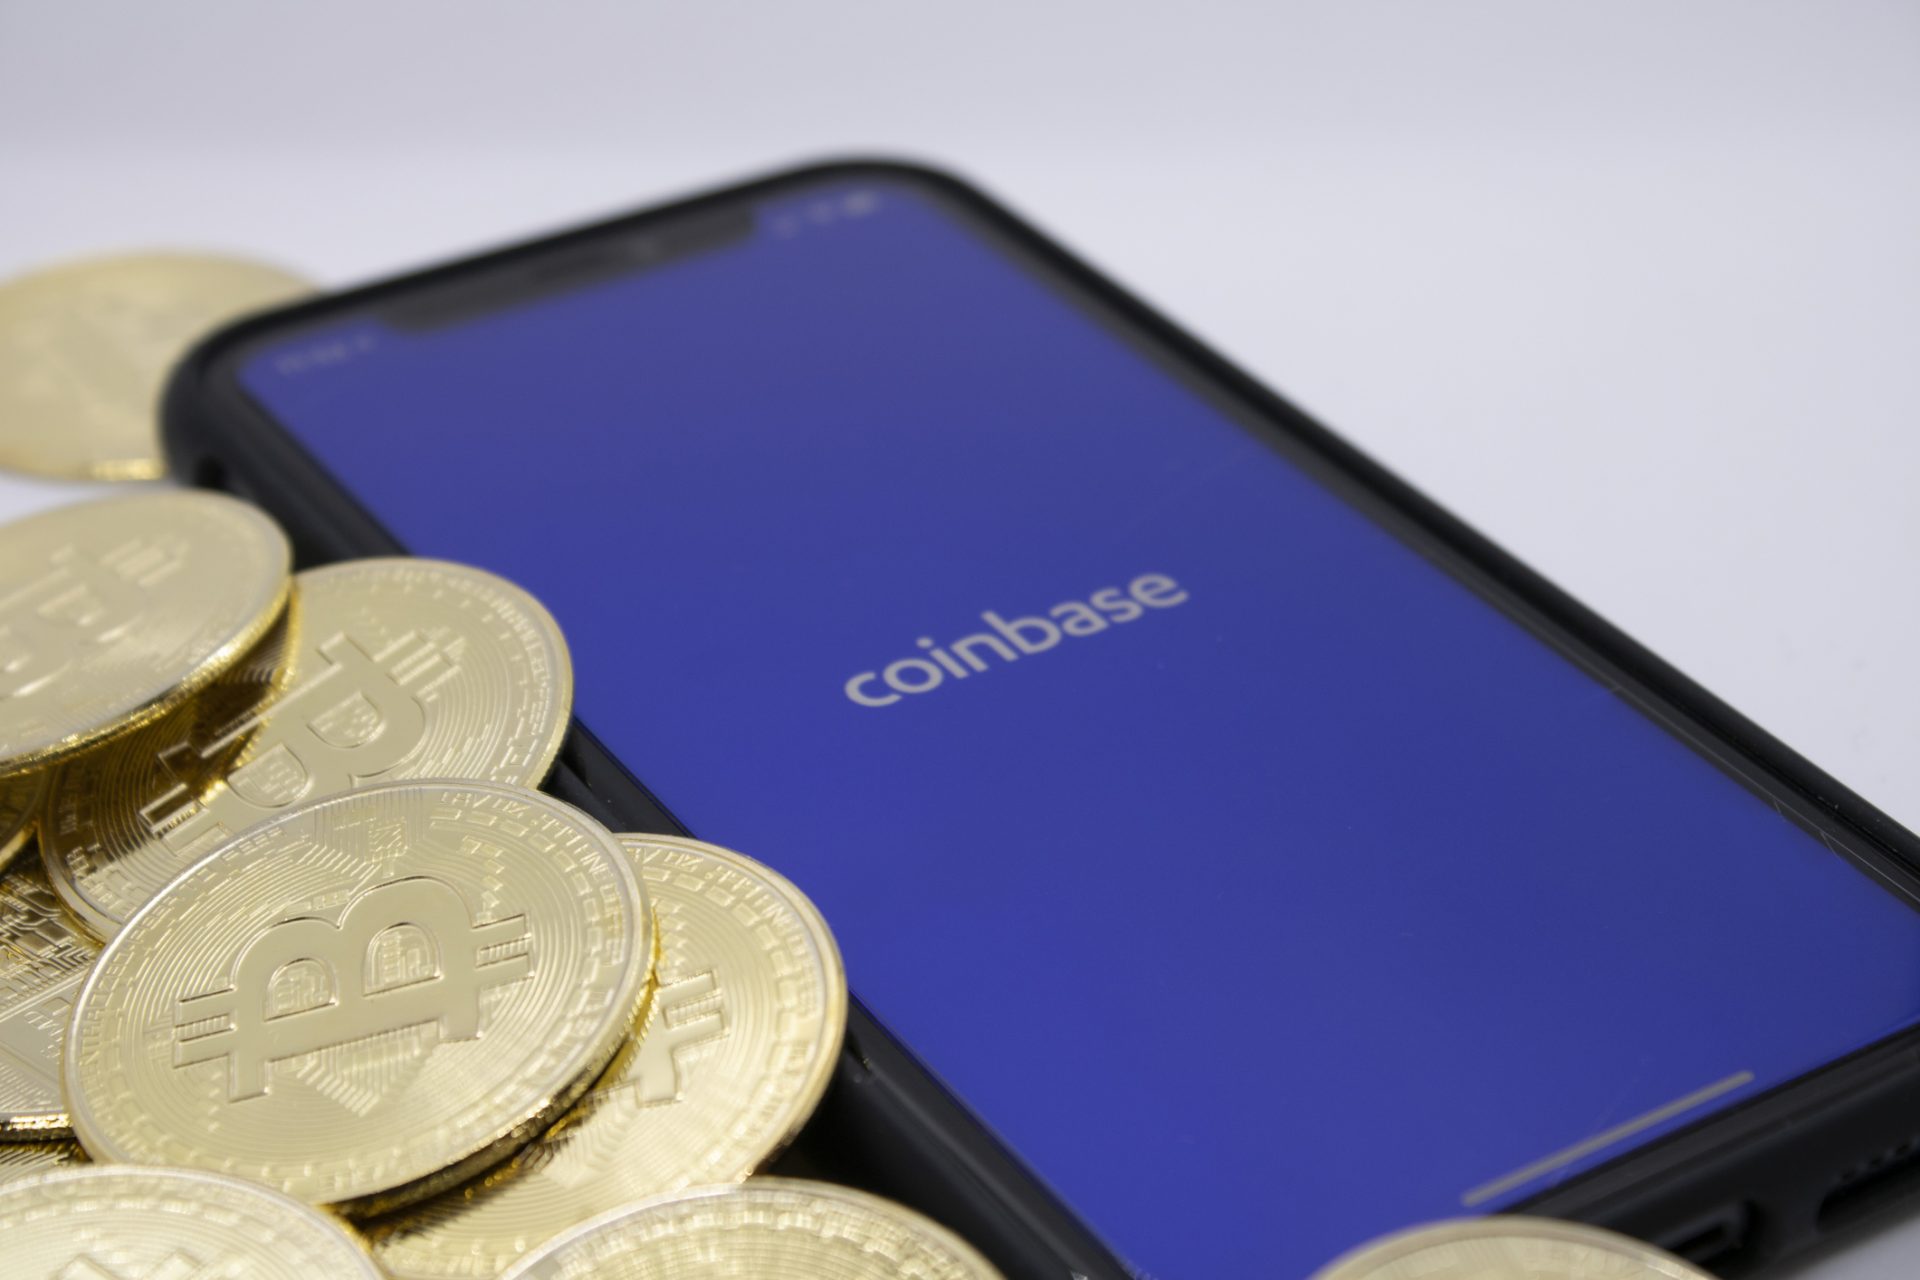 can you buy with credit card on coinbase